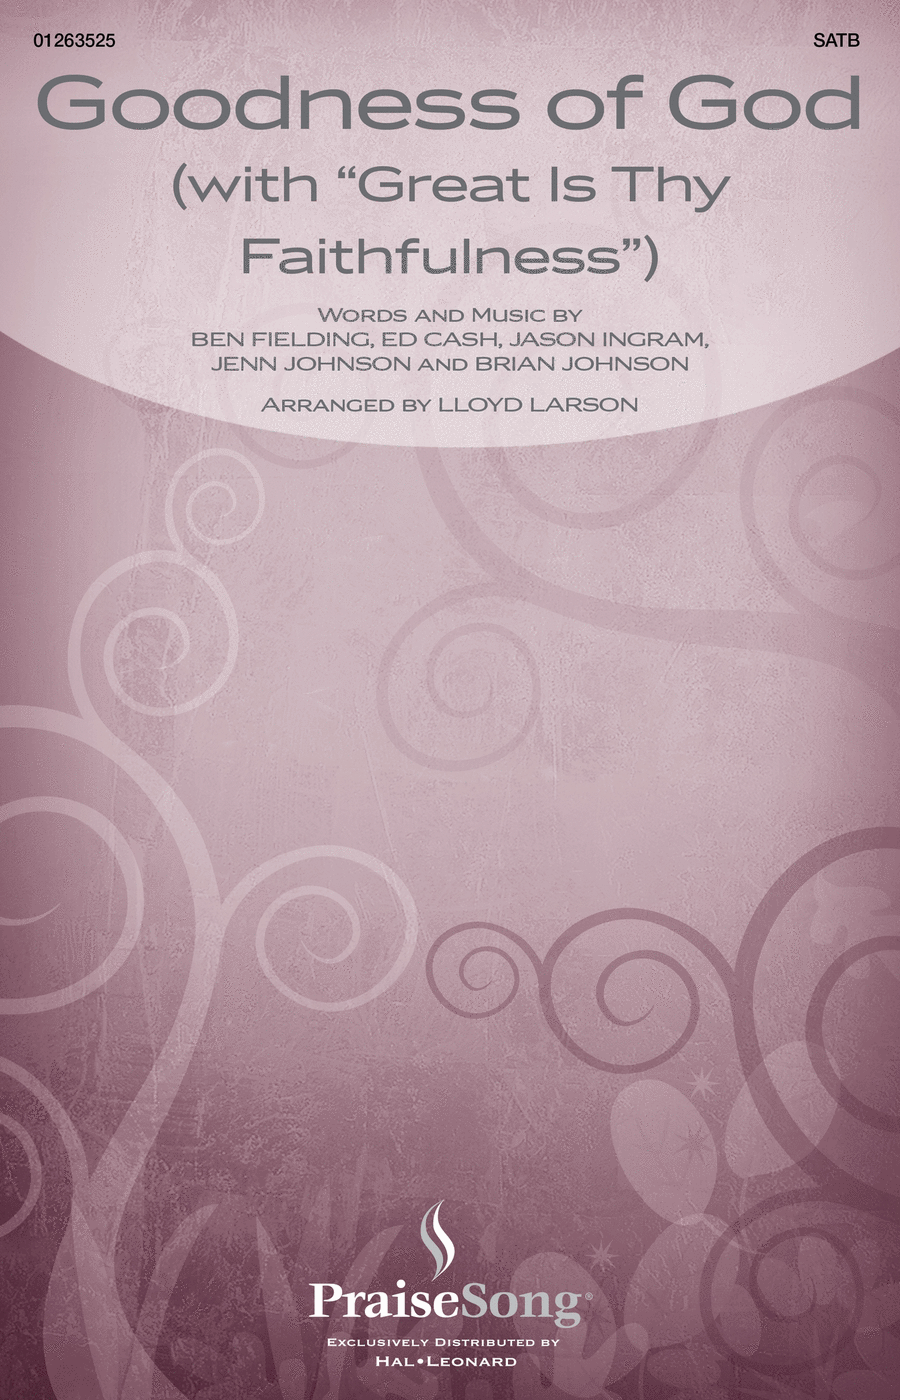 Goodness of God (with “Great Is Thy Faithfulness”)